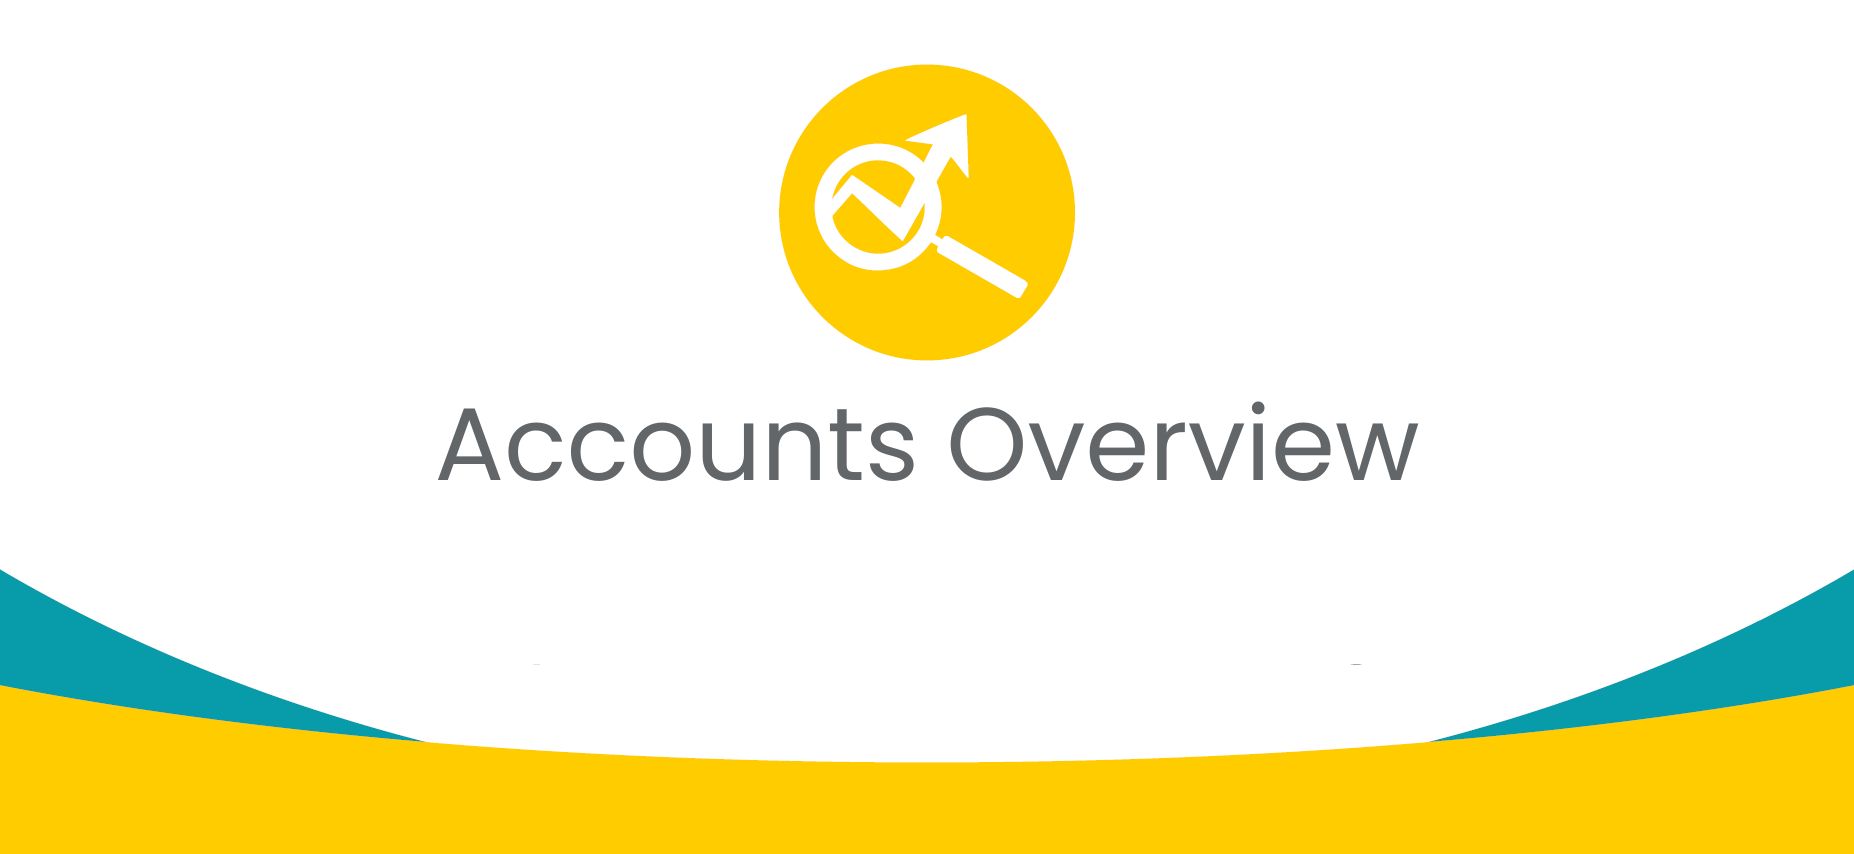 Accounts Overview